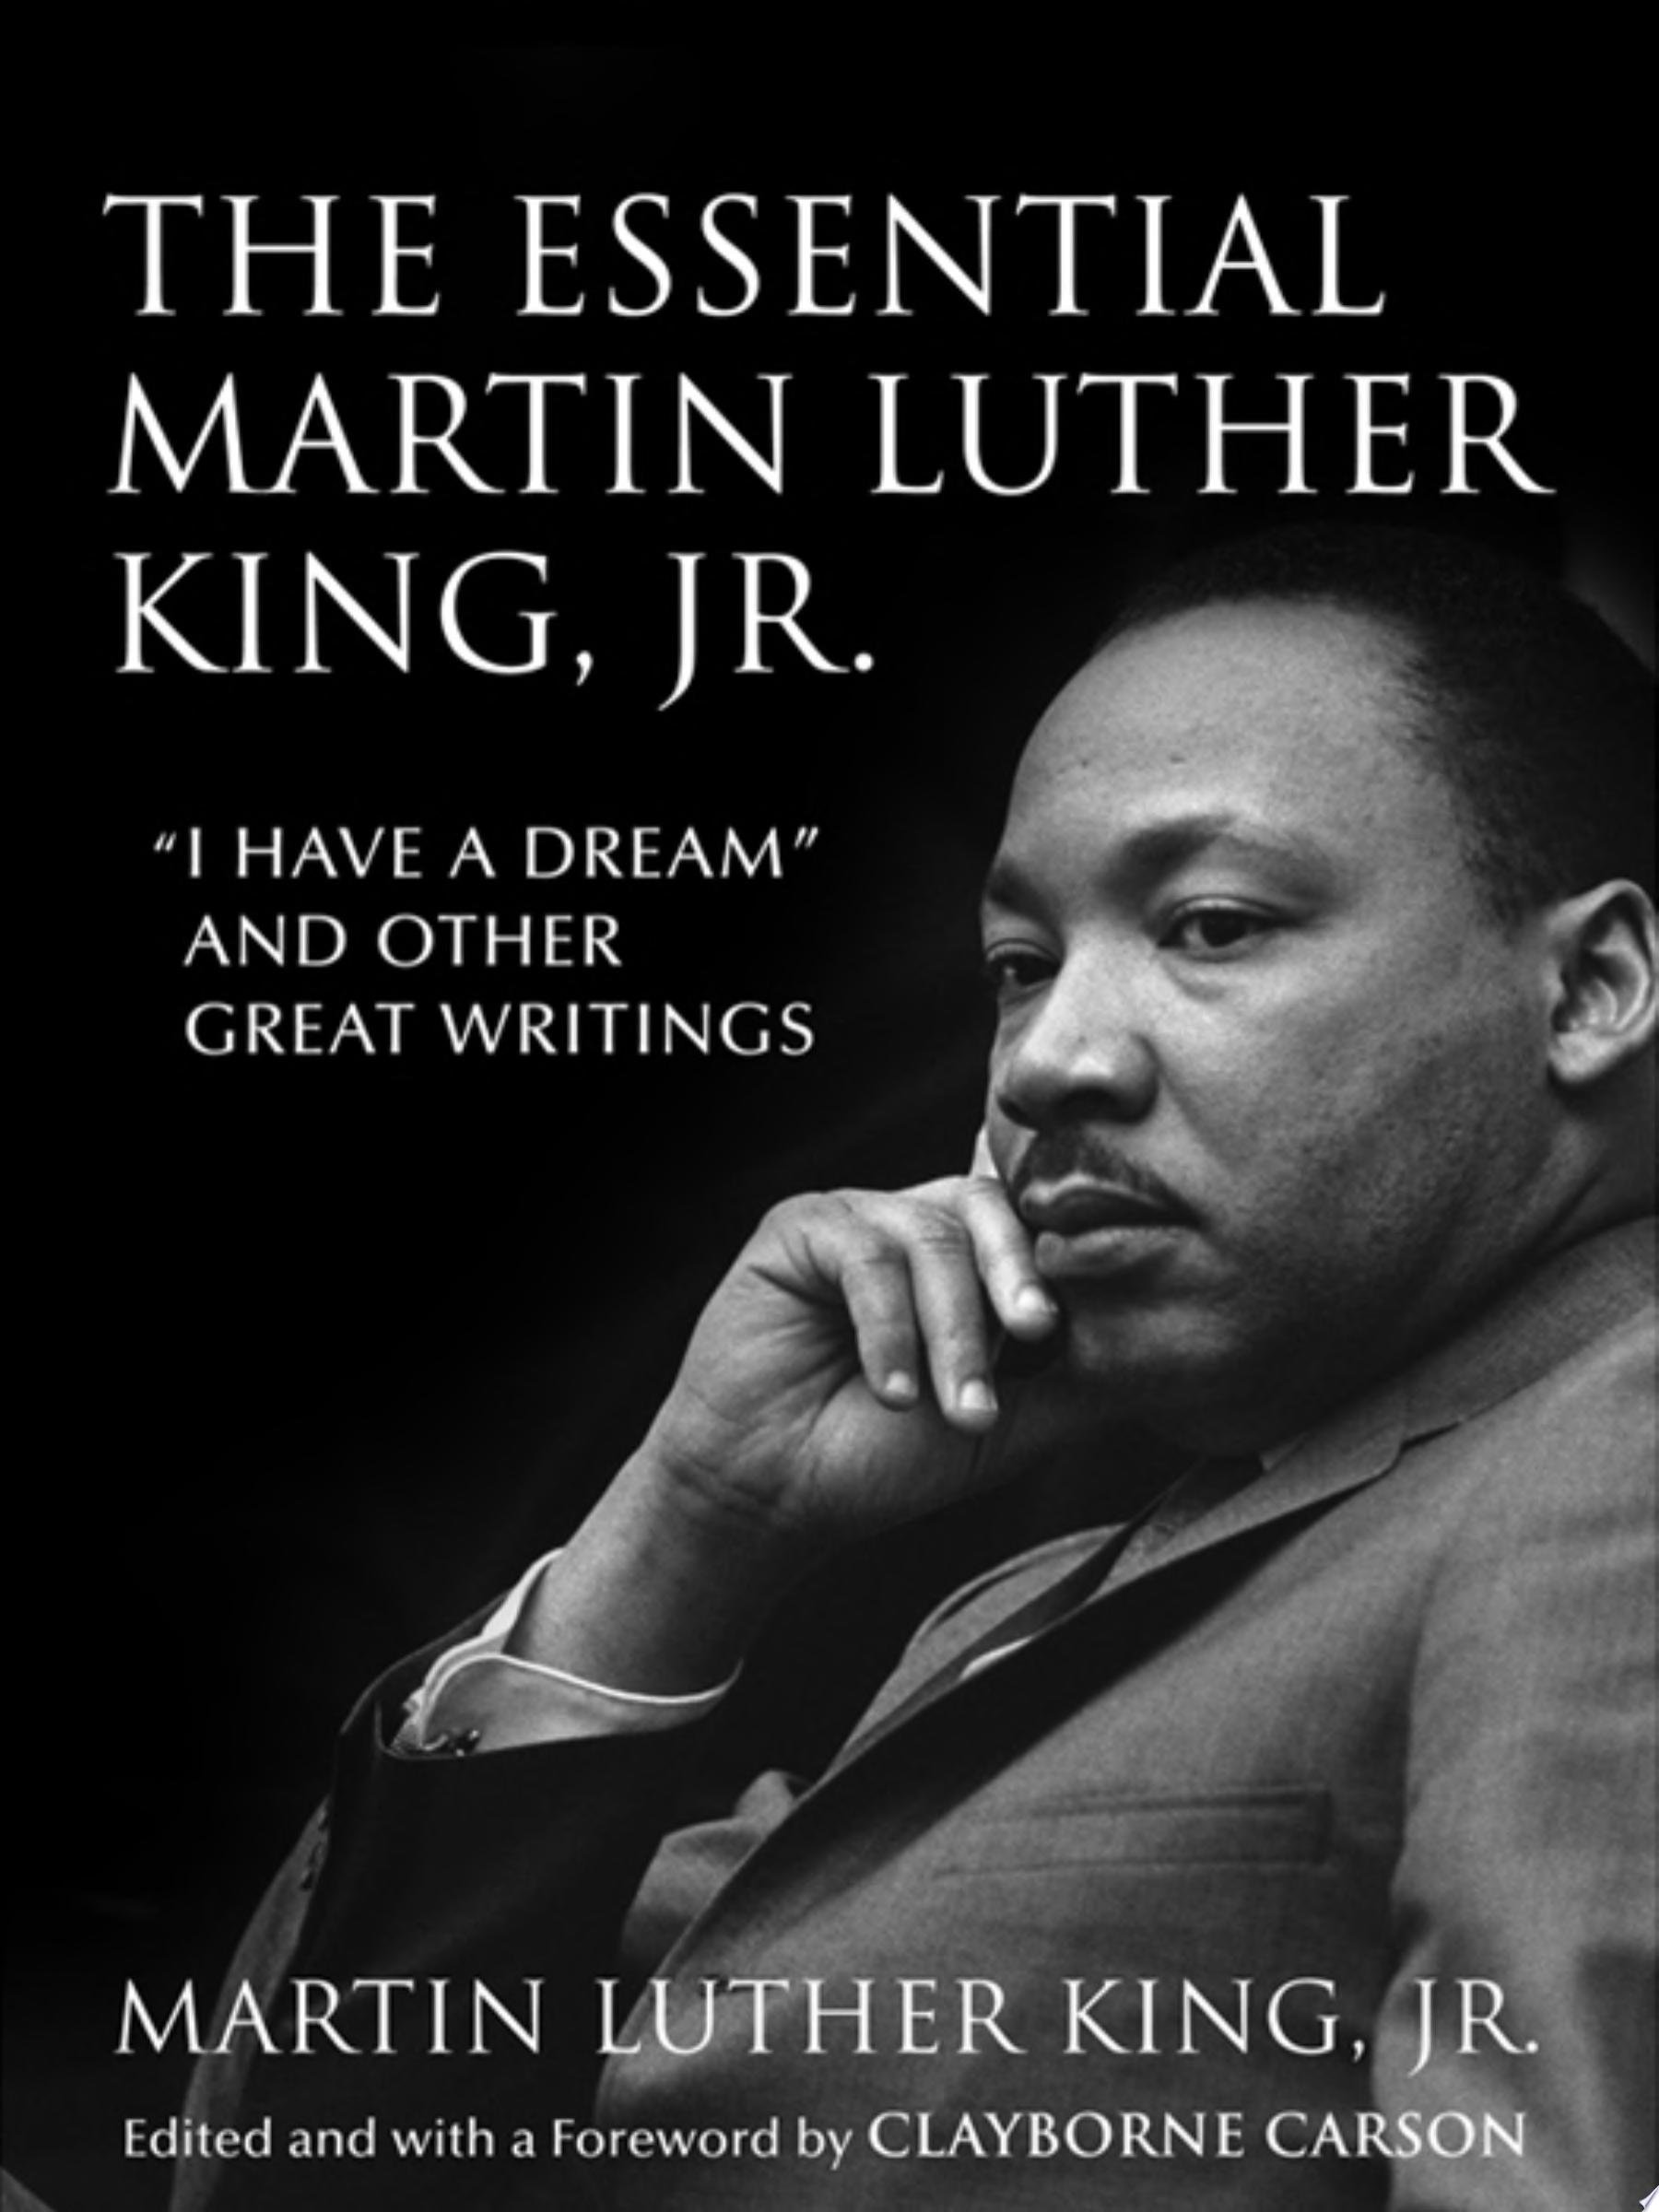 Image for "The Essential Martin Luther King, Jr."